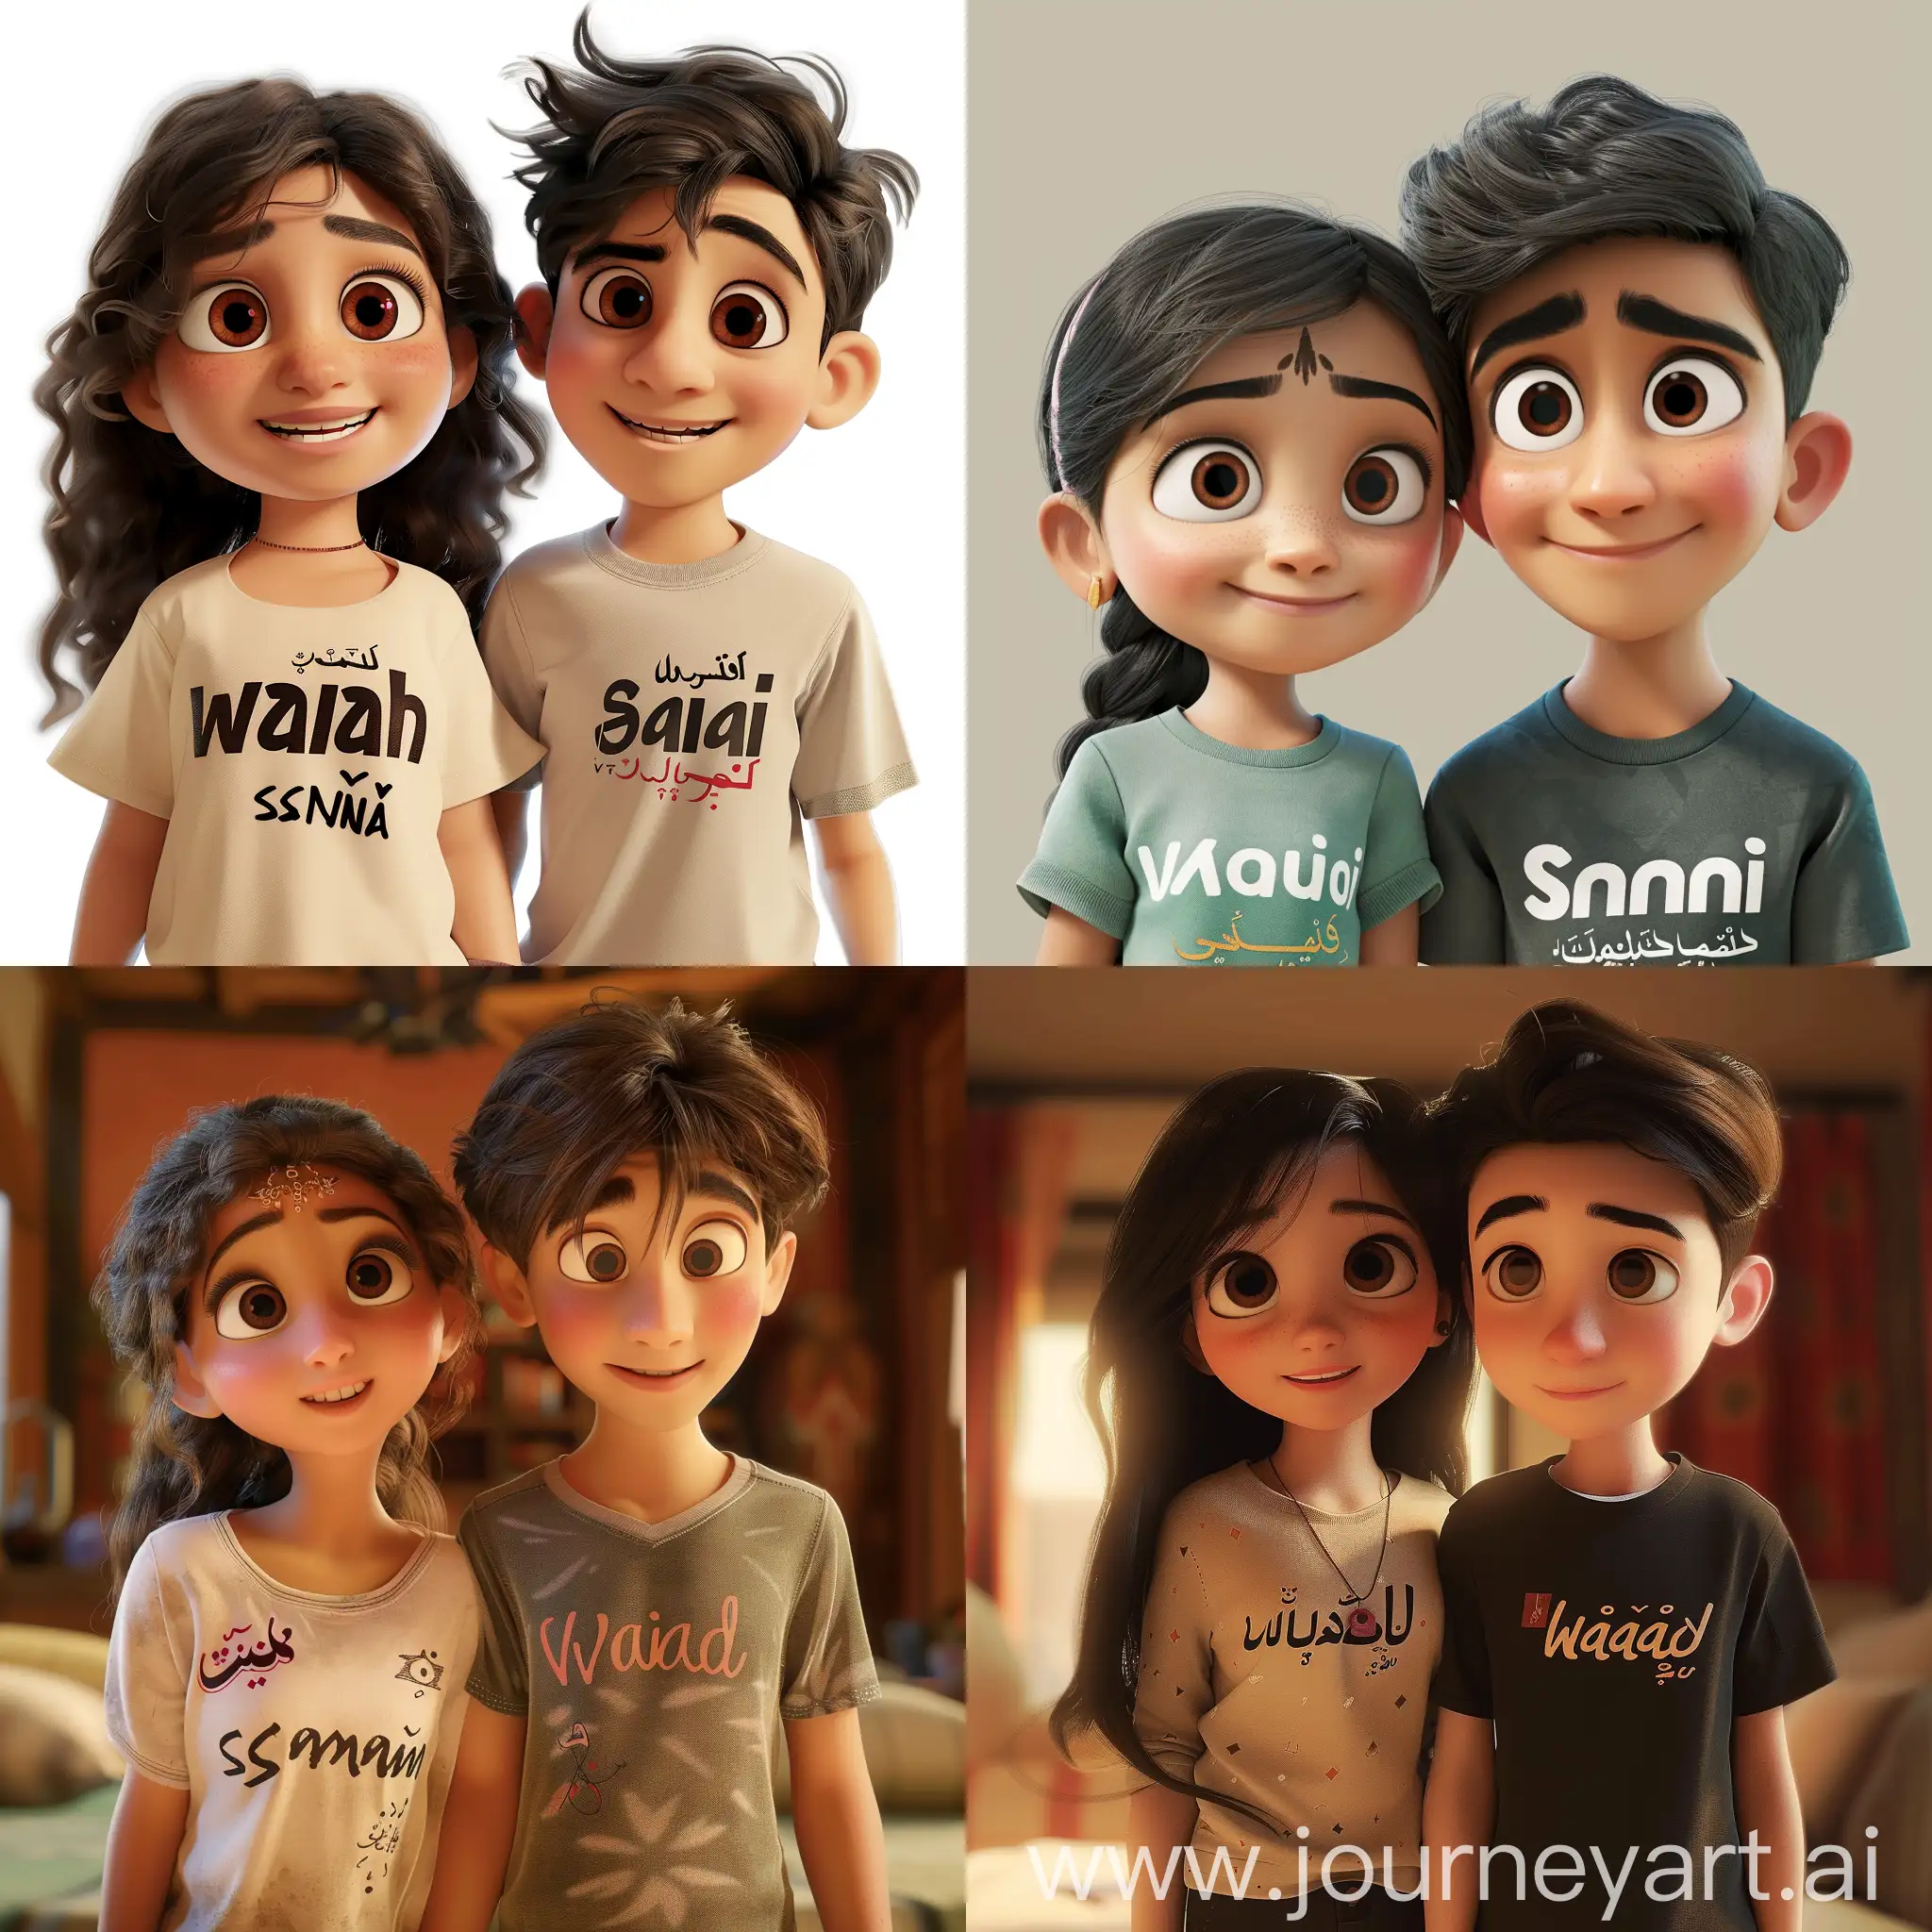 a cute young couple, on girls shirt there is awais written and on boys shirt there is sania written, pixar style